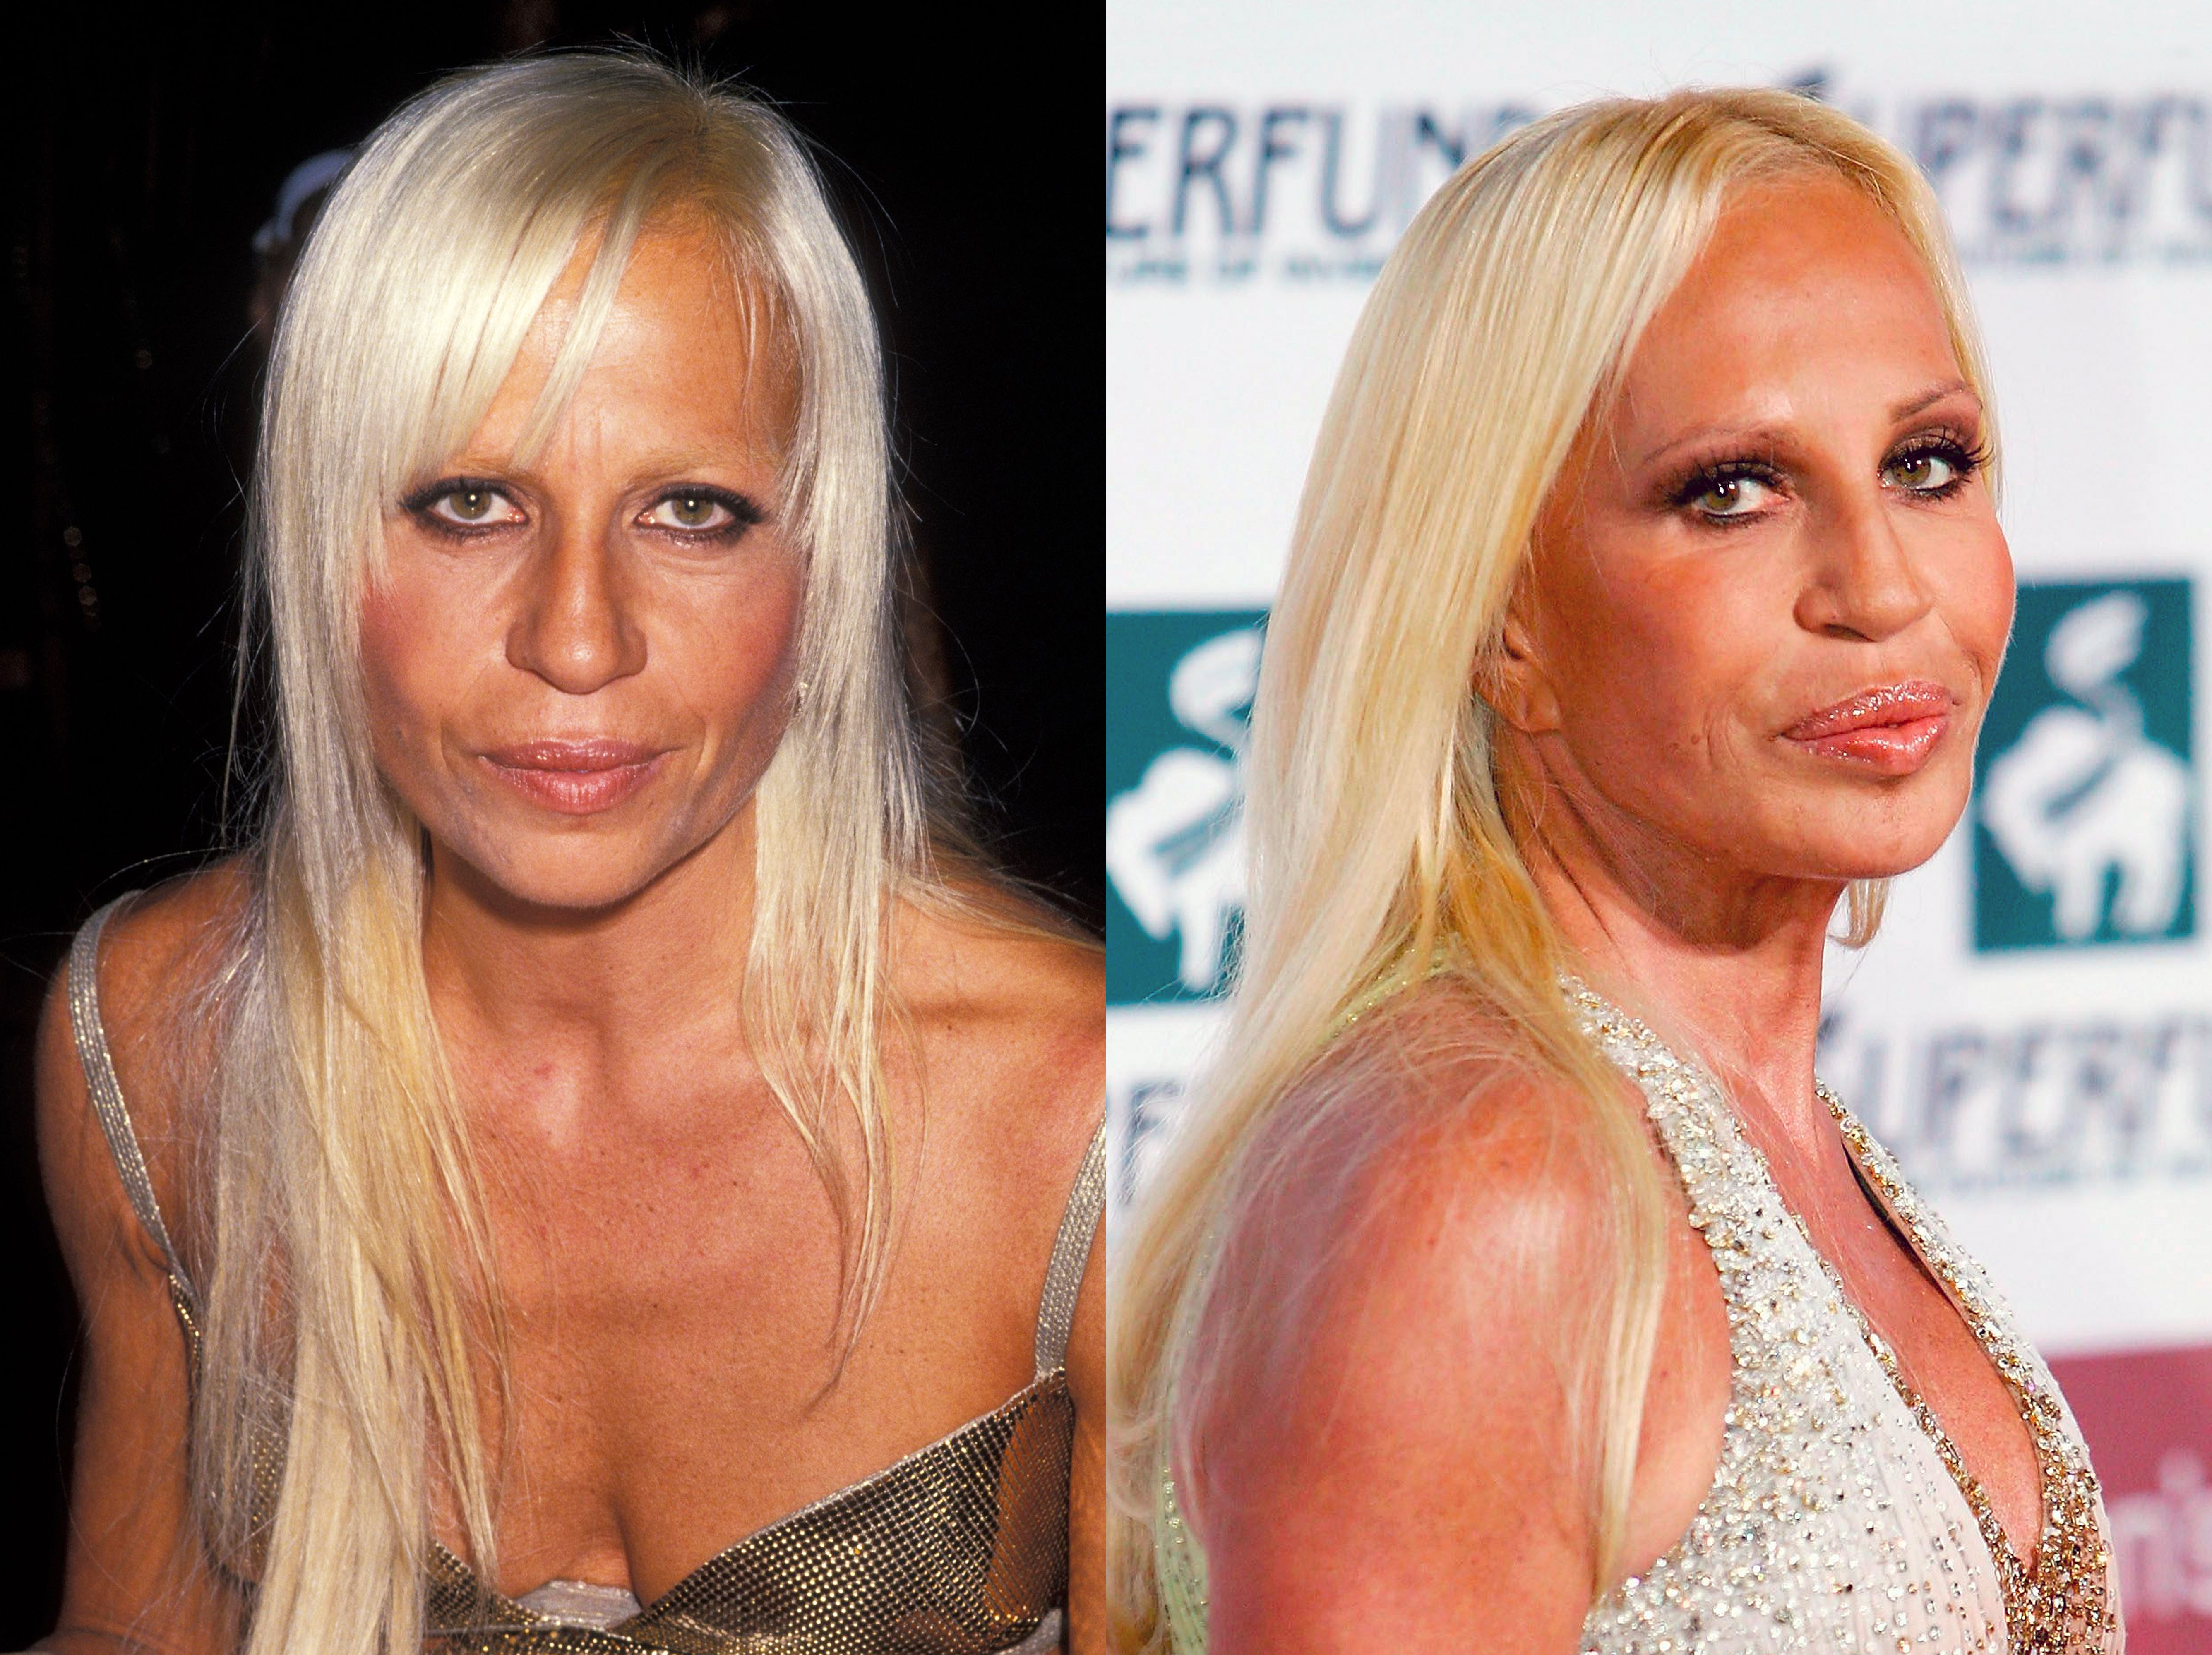 Donatella Versace in 1996 vs 2005 | Source: Getty Images